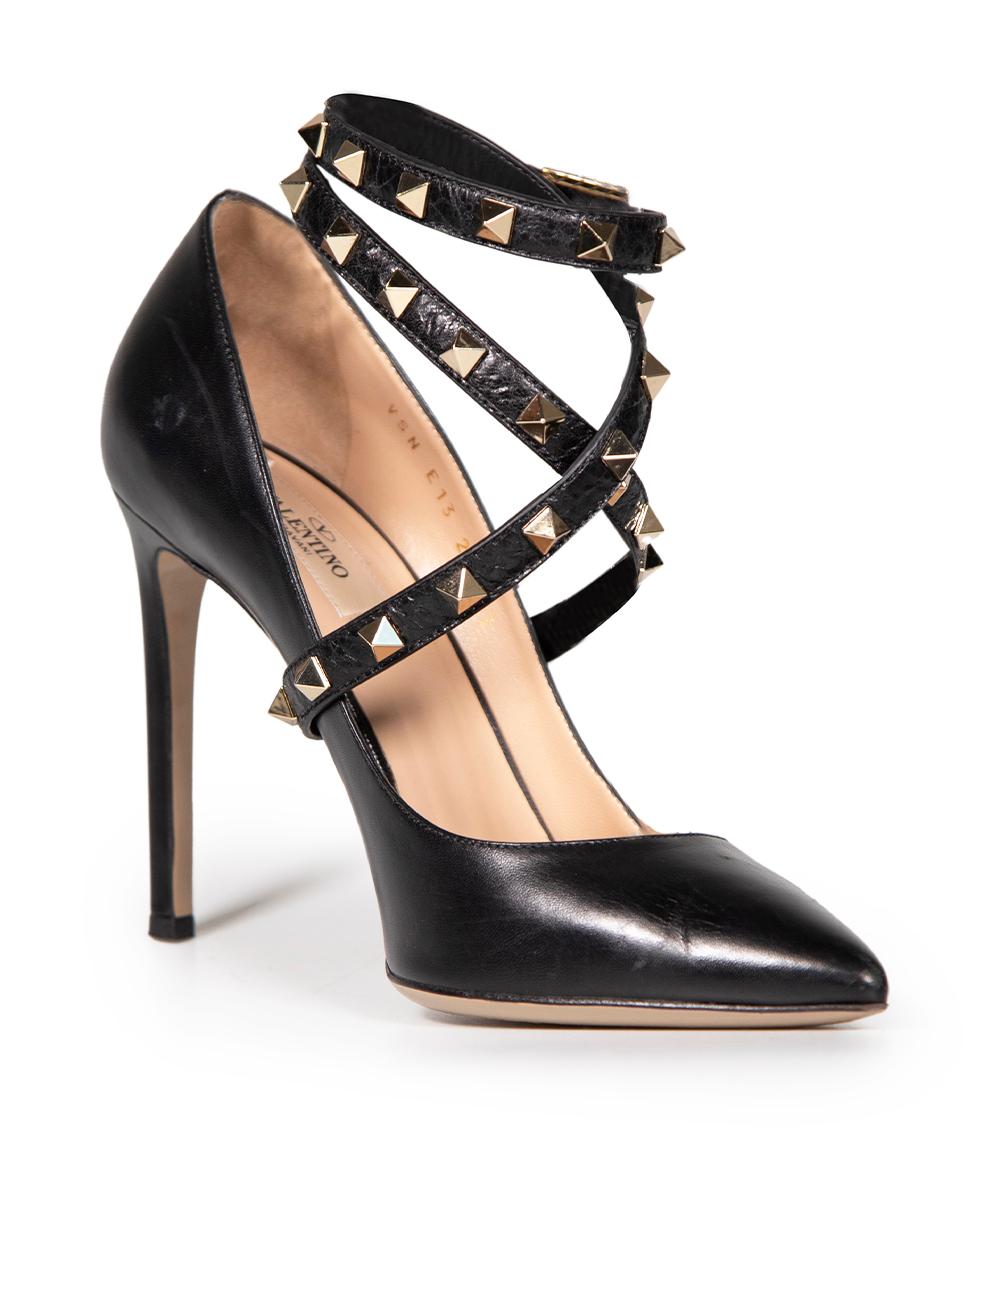 CONDITION is Very good. Minimal wear to shoes is evident. Minimal wear to both sides of both shoes with light scratches to the leather on this used Valentino designer resale item.
 
 Details
 Black
 Leather
 Heels
 Point toe
 High heeled
 Rockstud